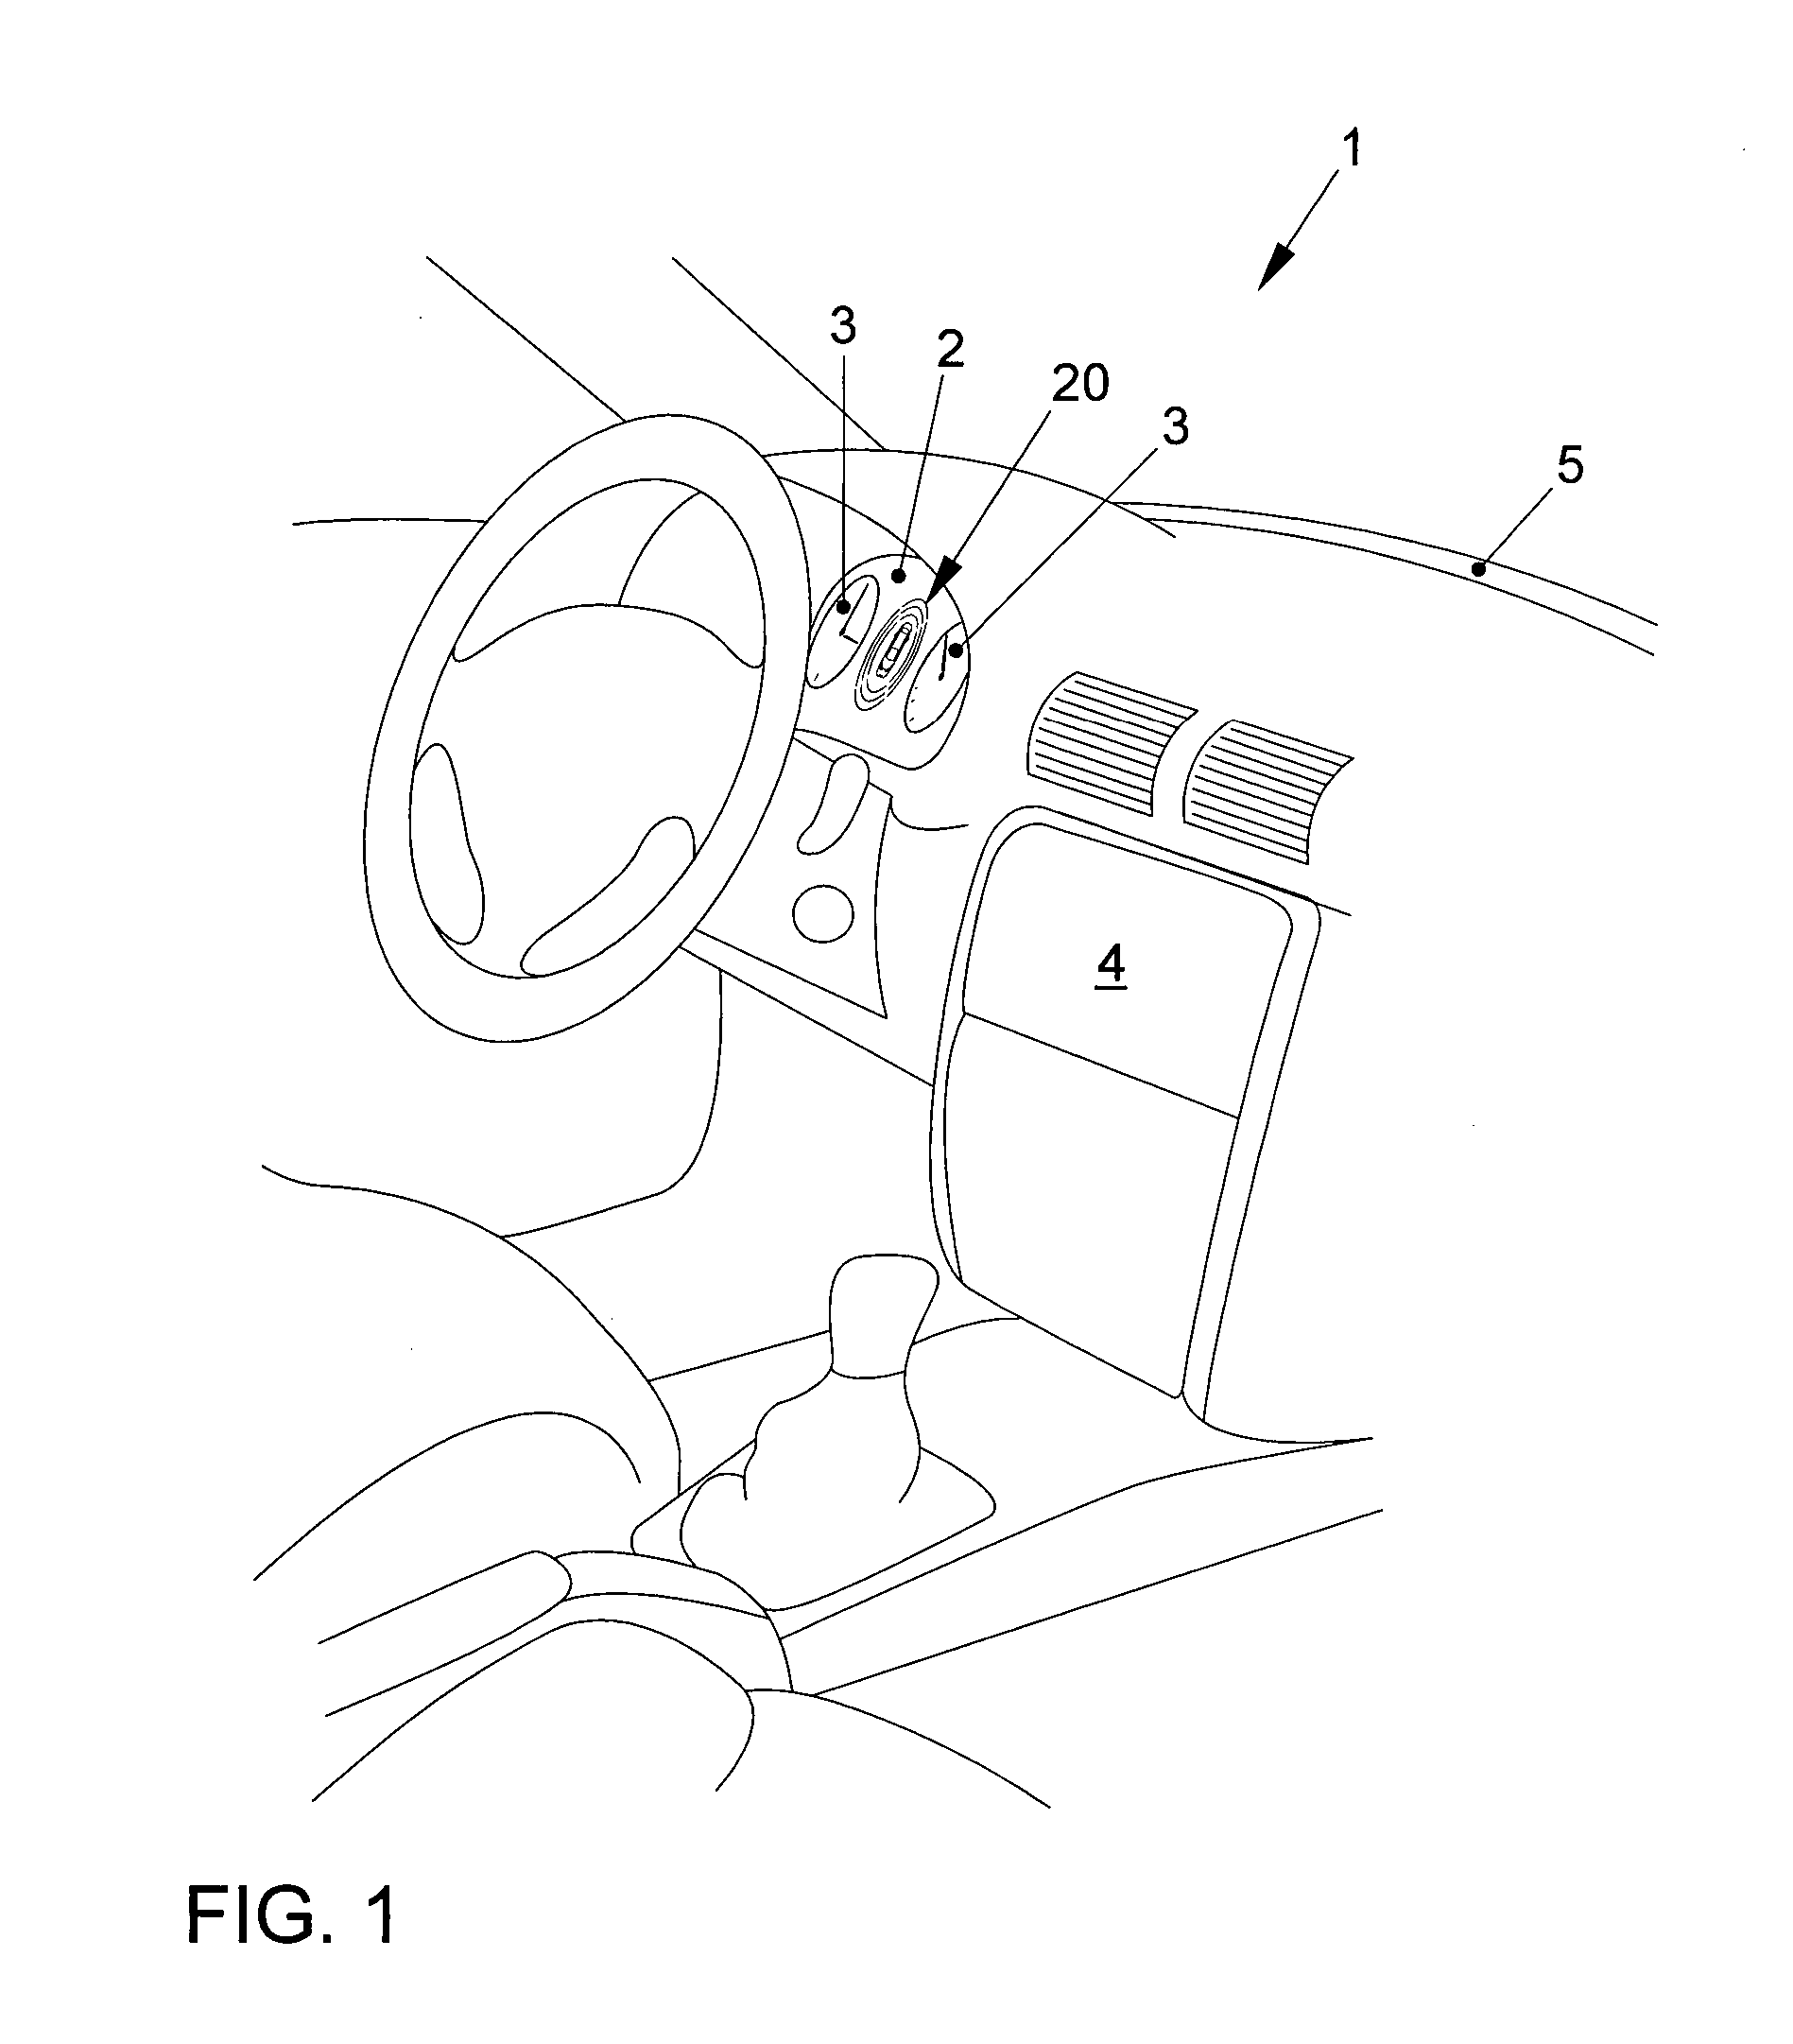 Method for outputting alert messages of a driver assistance system and associated driver assistance system